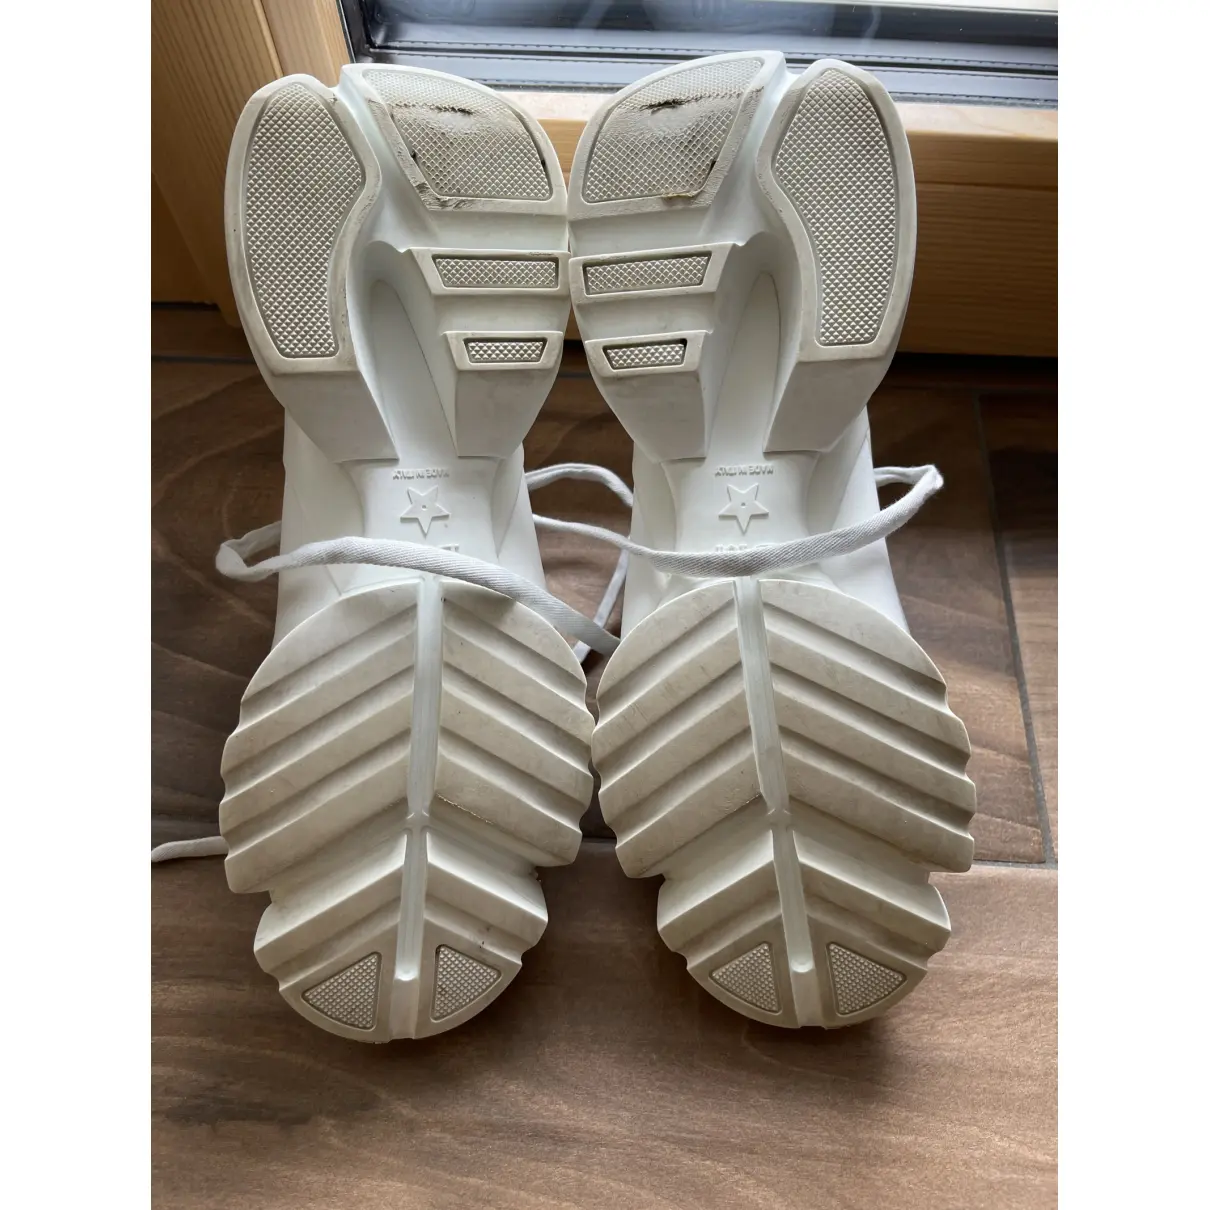 D-Connect leather trainers Dior